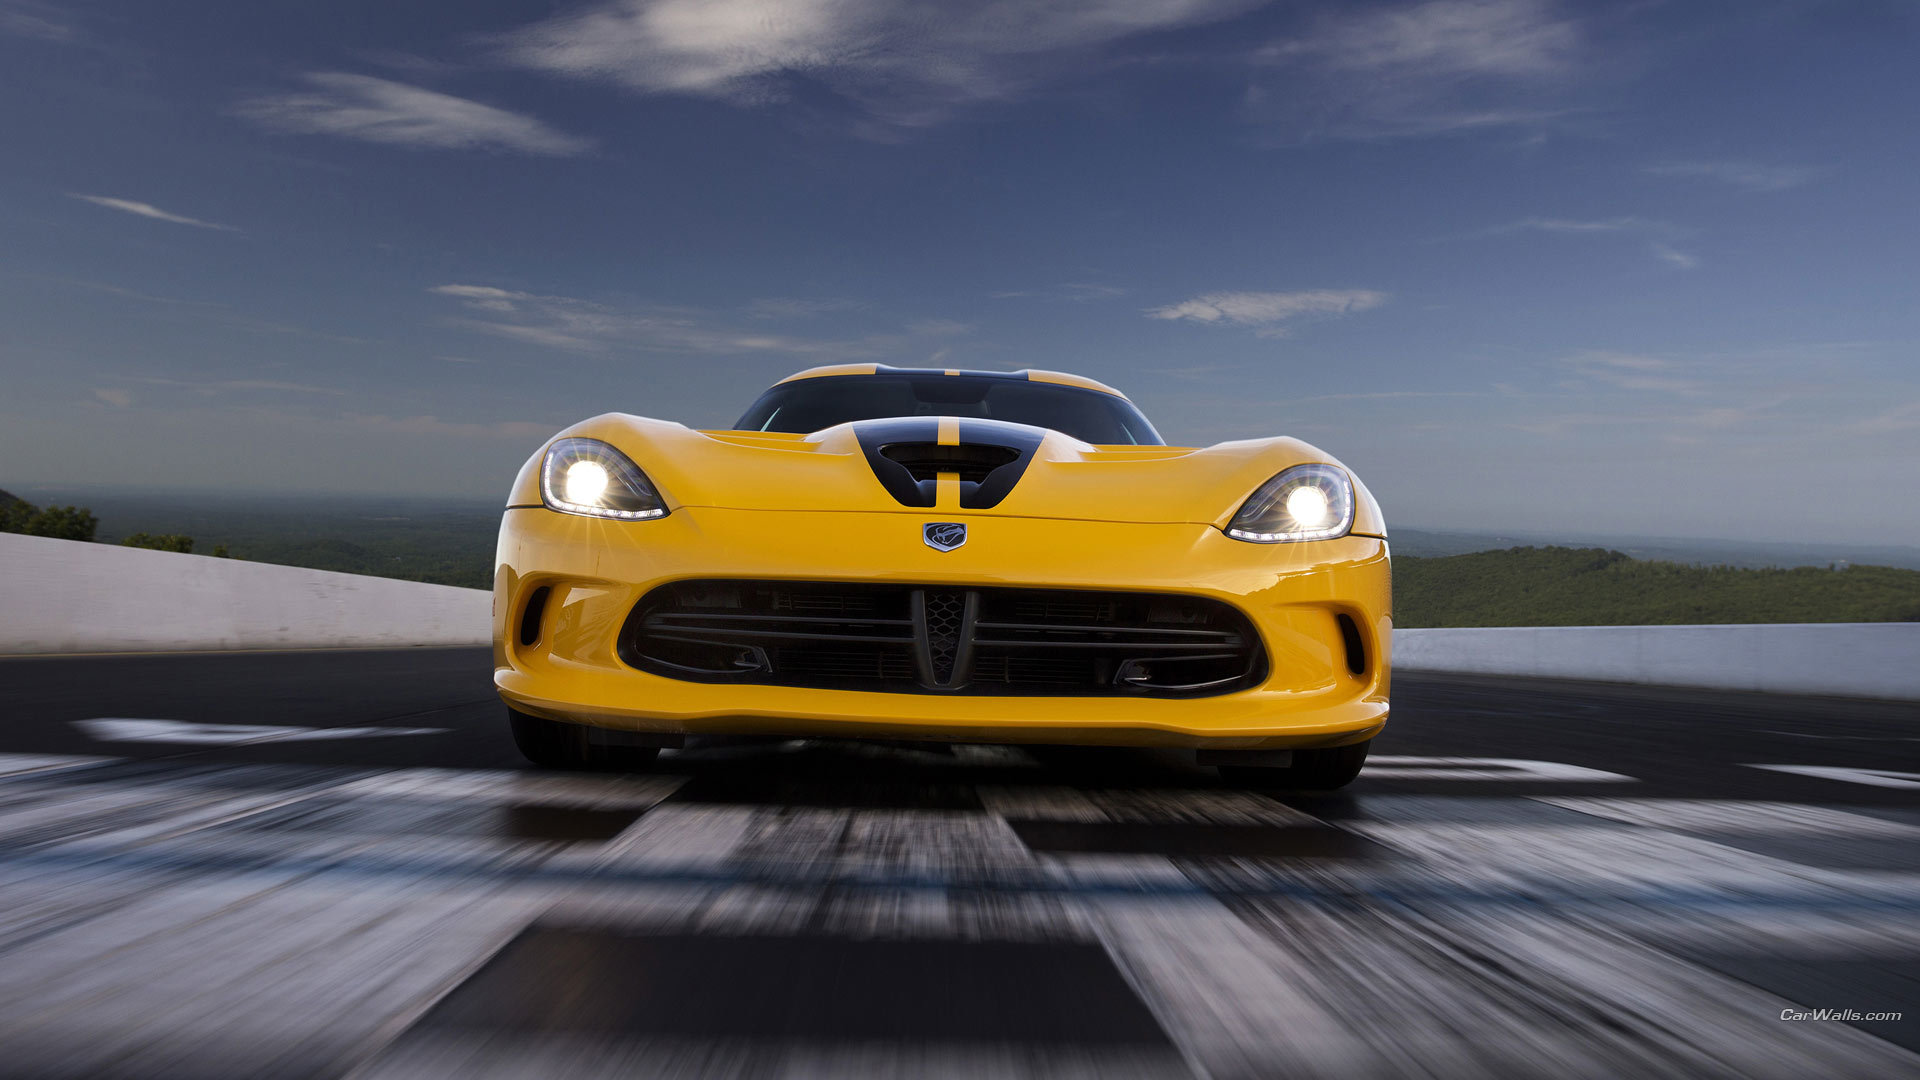 Best Dodge Viper SRT background ID:193443 for High Resolution hd 1920x1080 computer